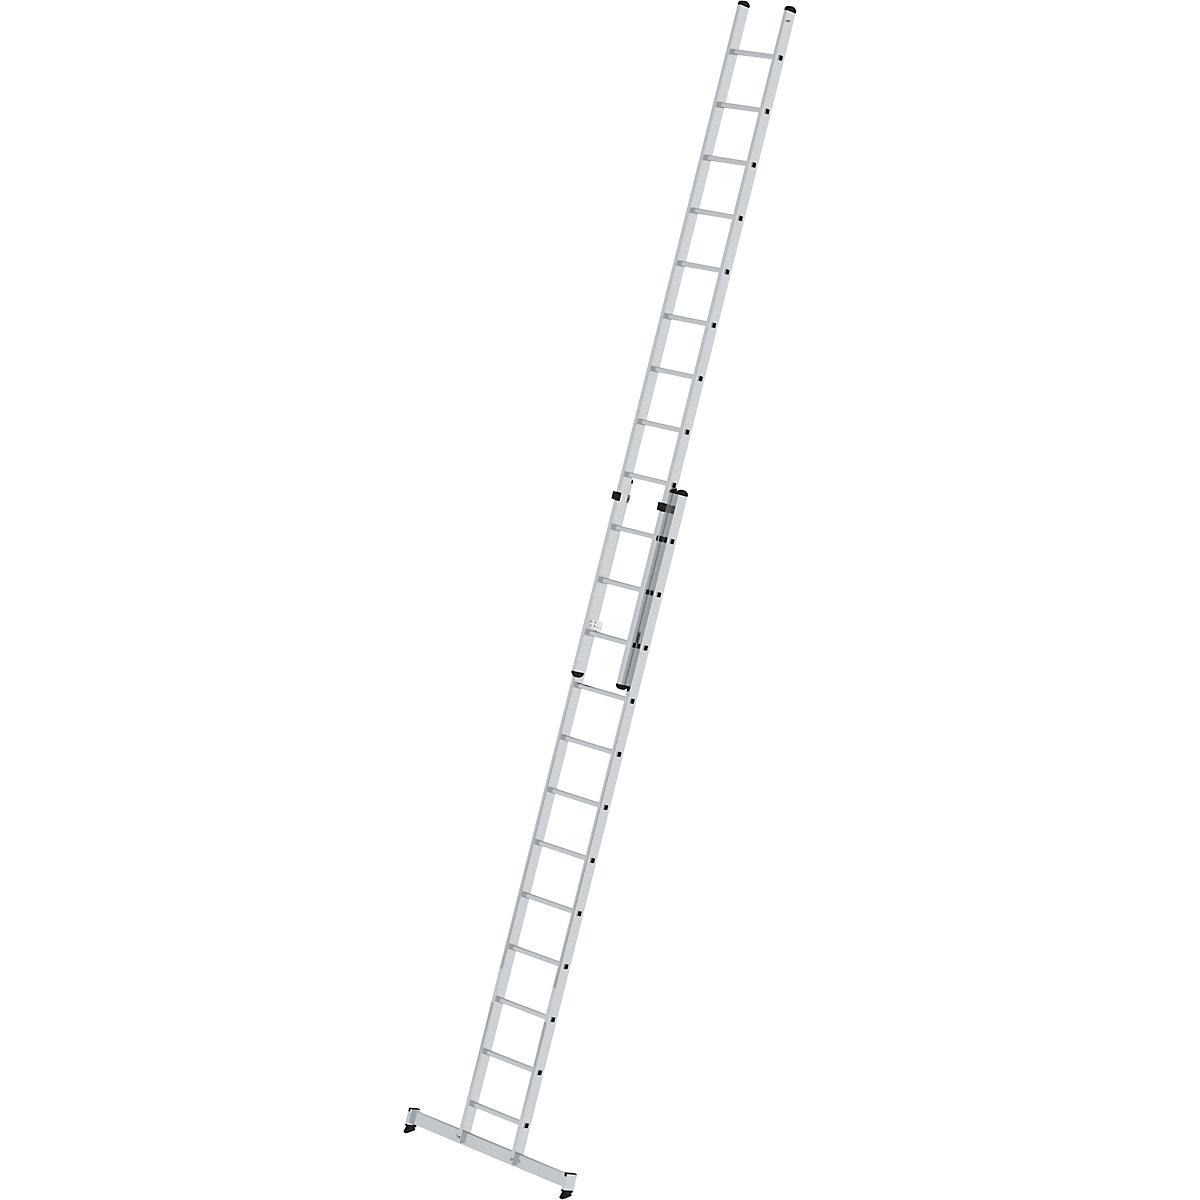 Height adjustable lean-to ladder – MUNK, extension ladder, 2-part, 2 x 12 rungs, with nivello® support-6